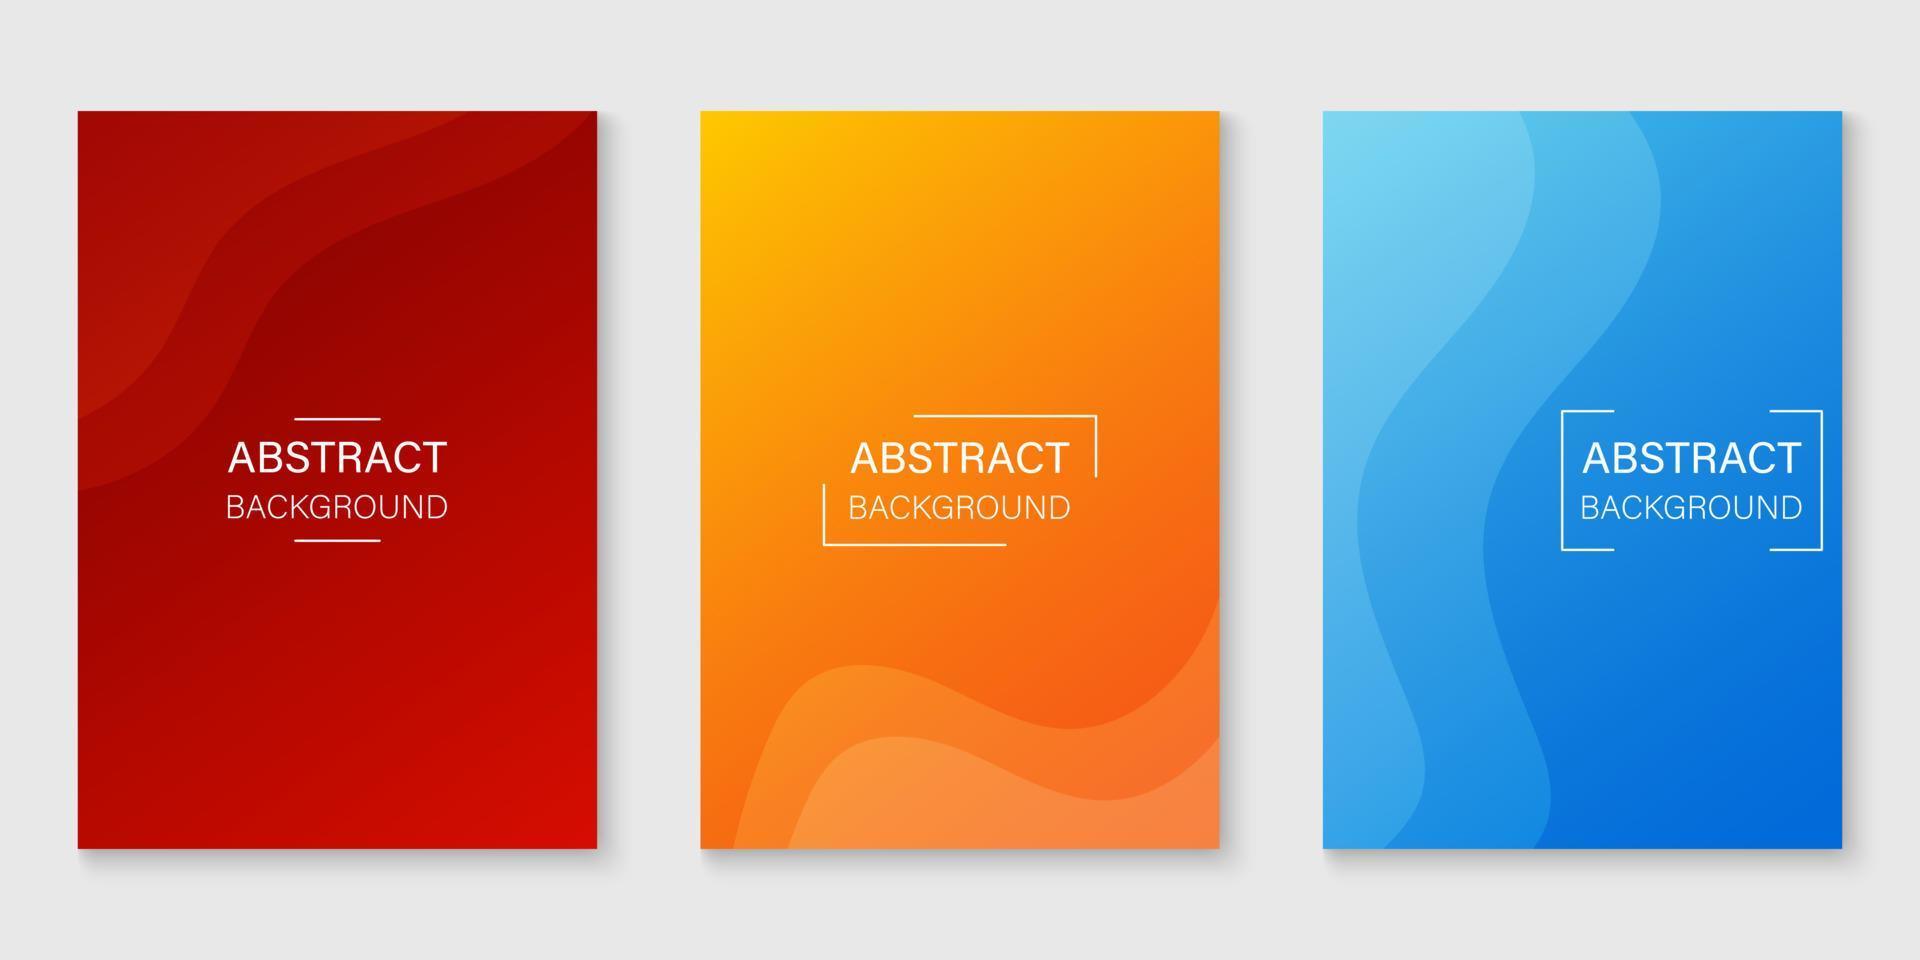 Color Gradient Dynamic Background. Blue, Orange, Red Wavy Line Template in Geometric Shape for Web Site. Abstract Modern Design for Poster, Wallpaper, Flyer. Vector Illustration.